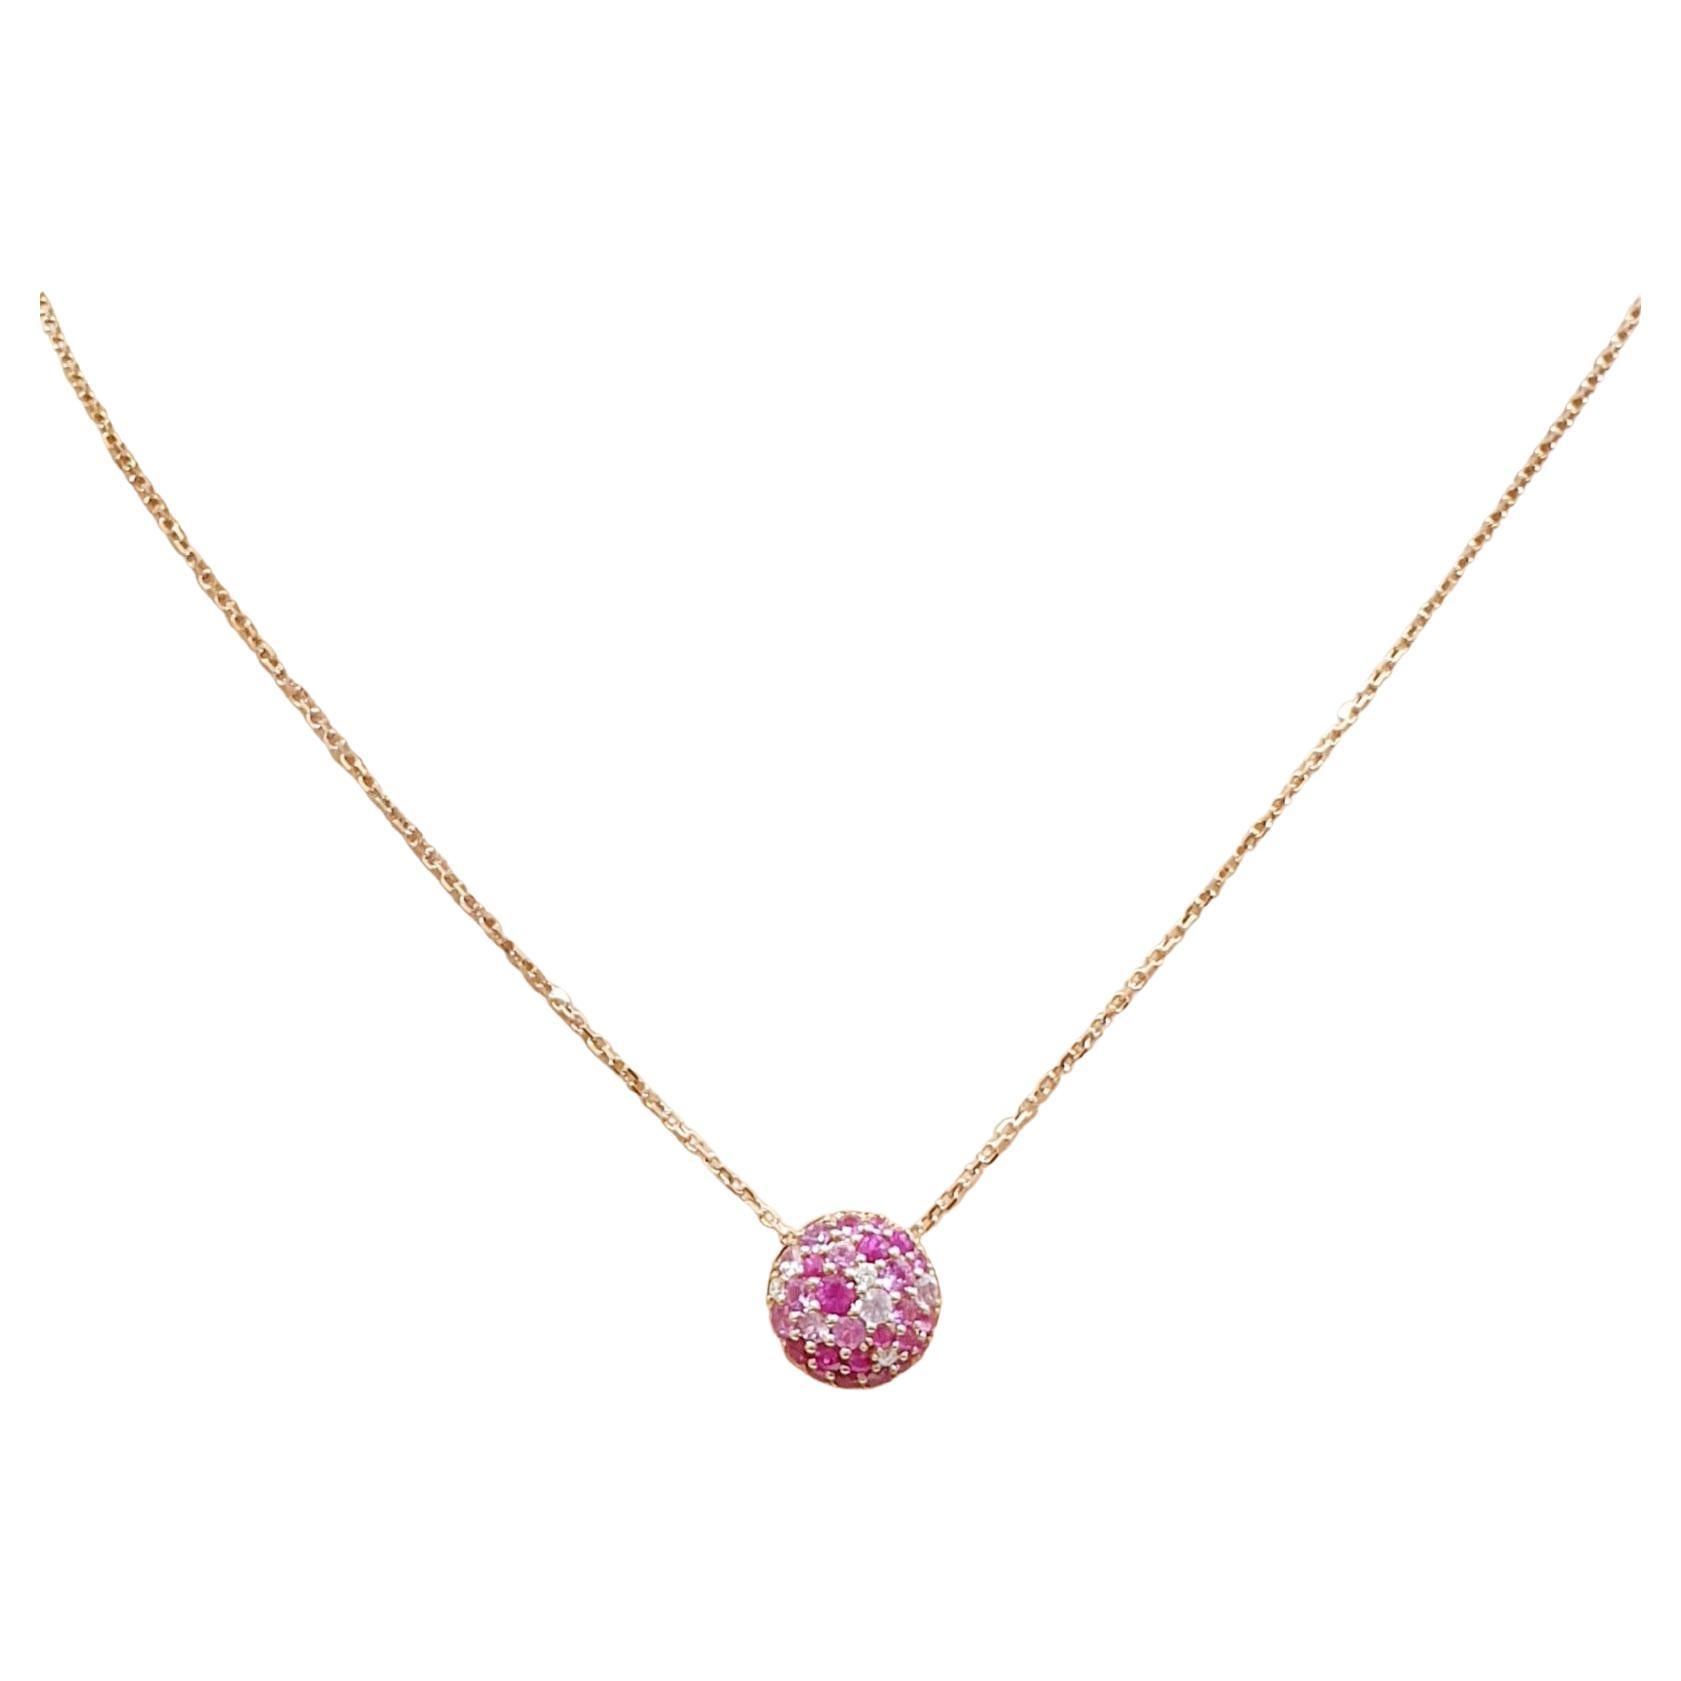  18 karat Rose Gold Chain with pavée of Ruby and Diamond Pendant